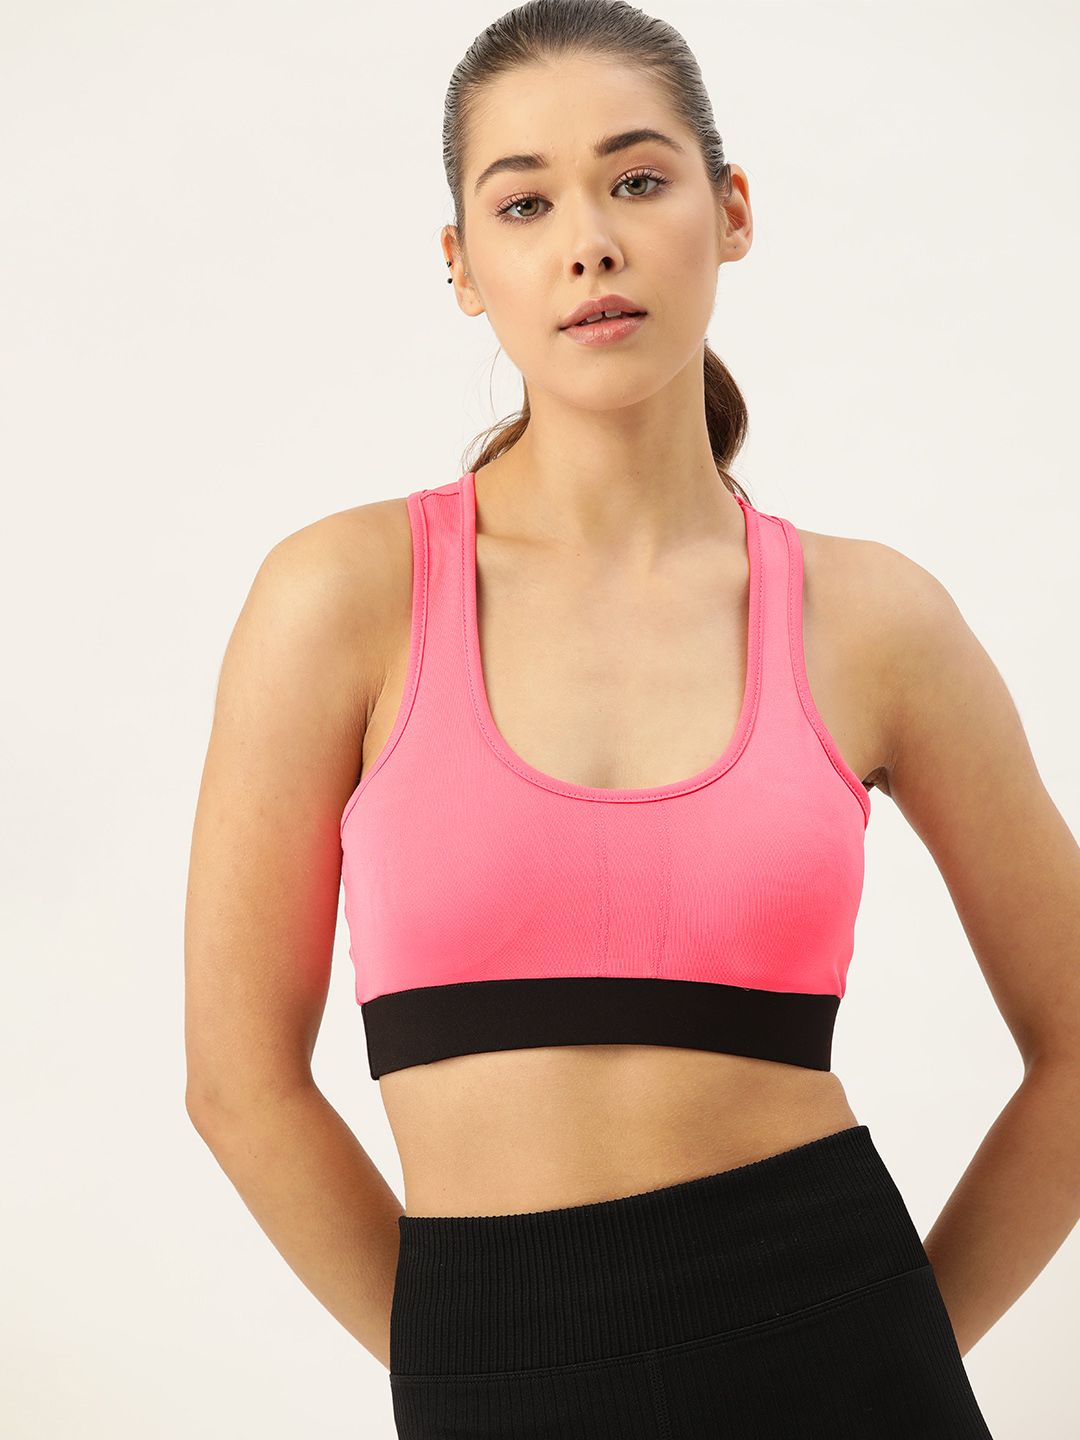 DressBerry Pink & Black Lightly Padded Workout Bra Price in India